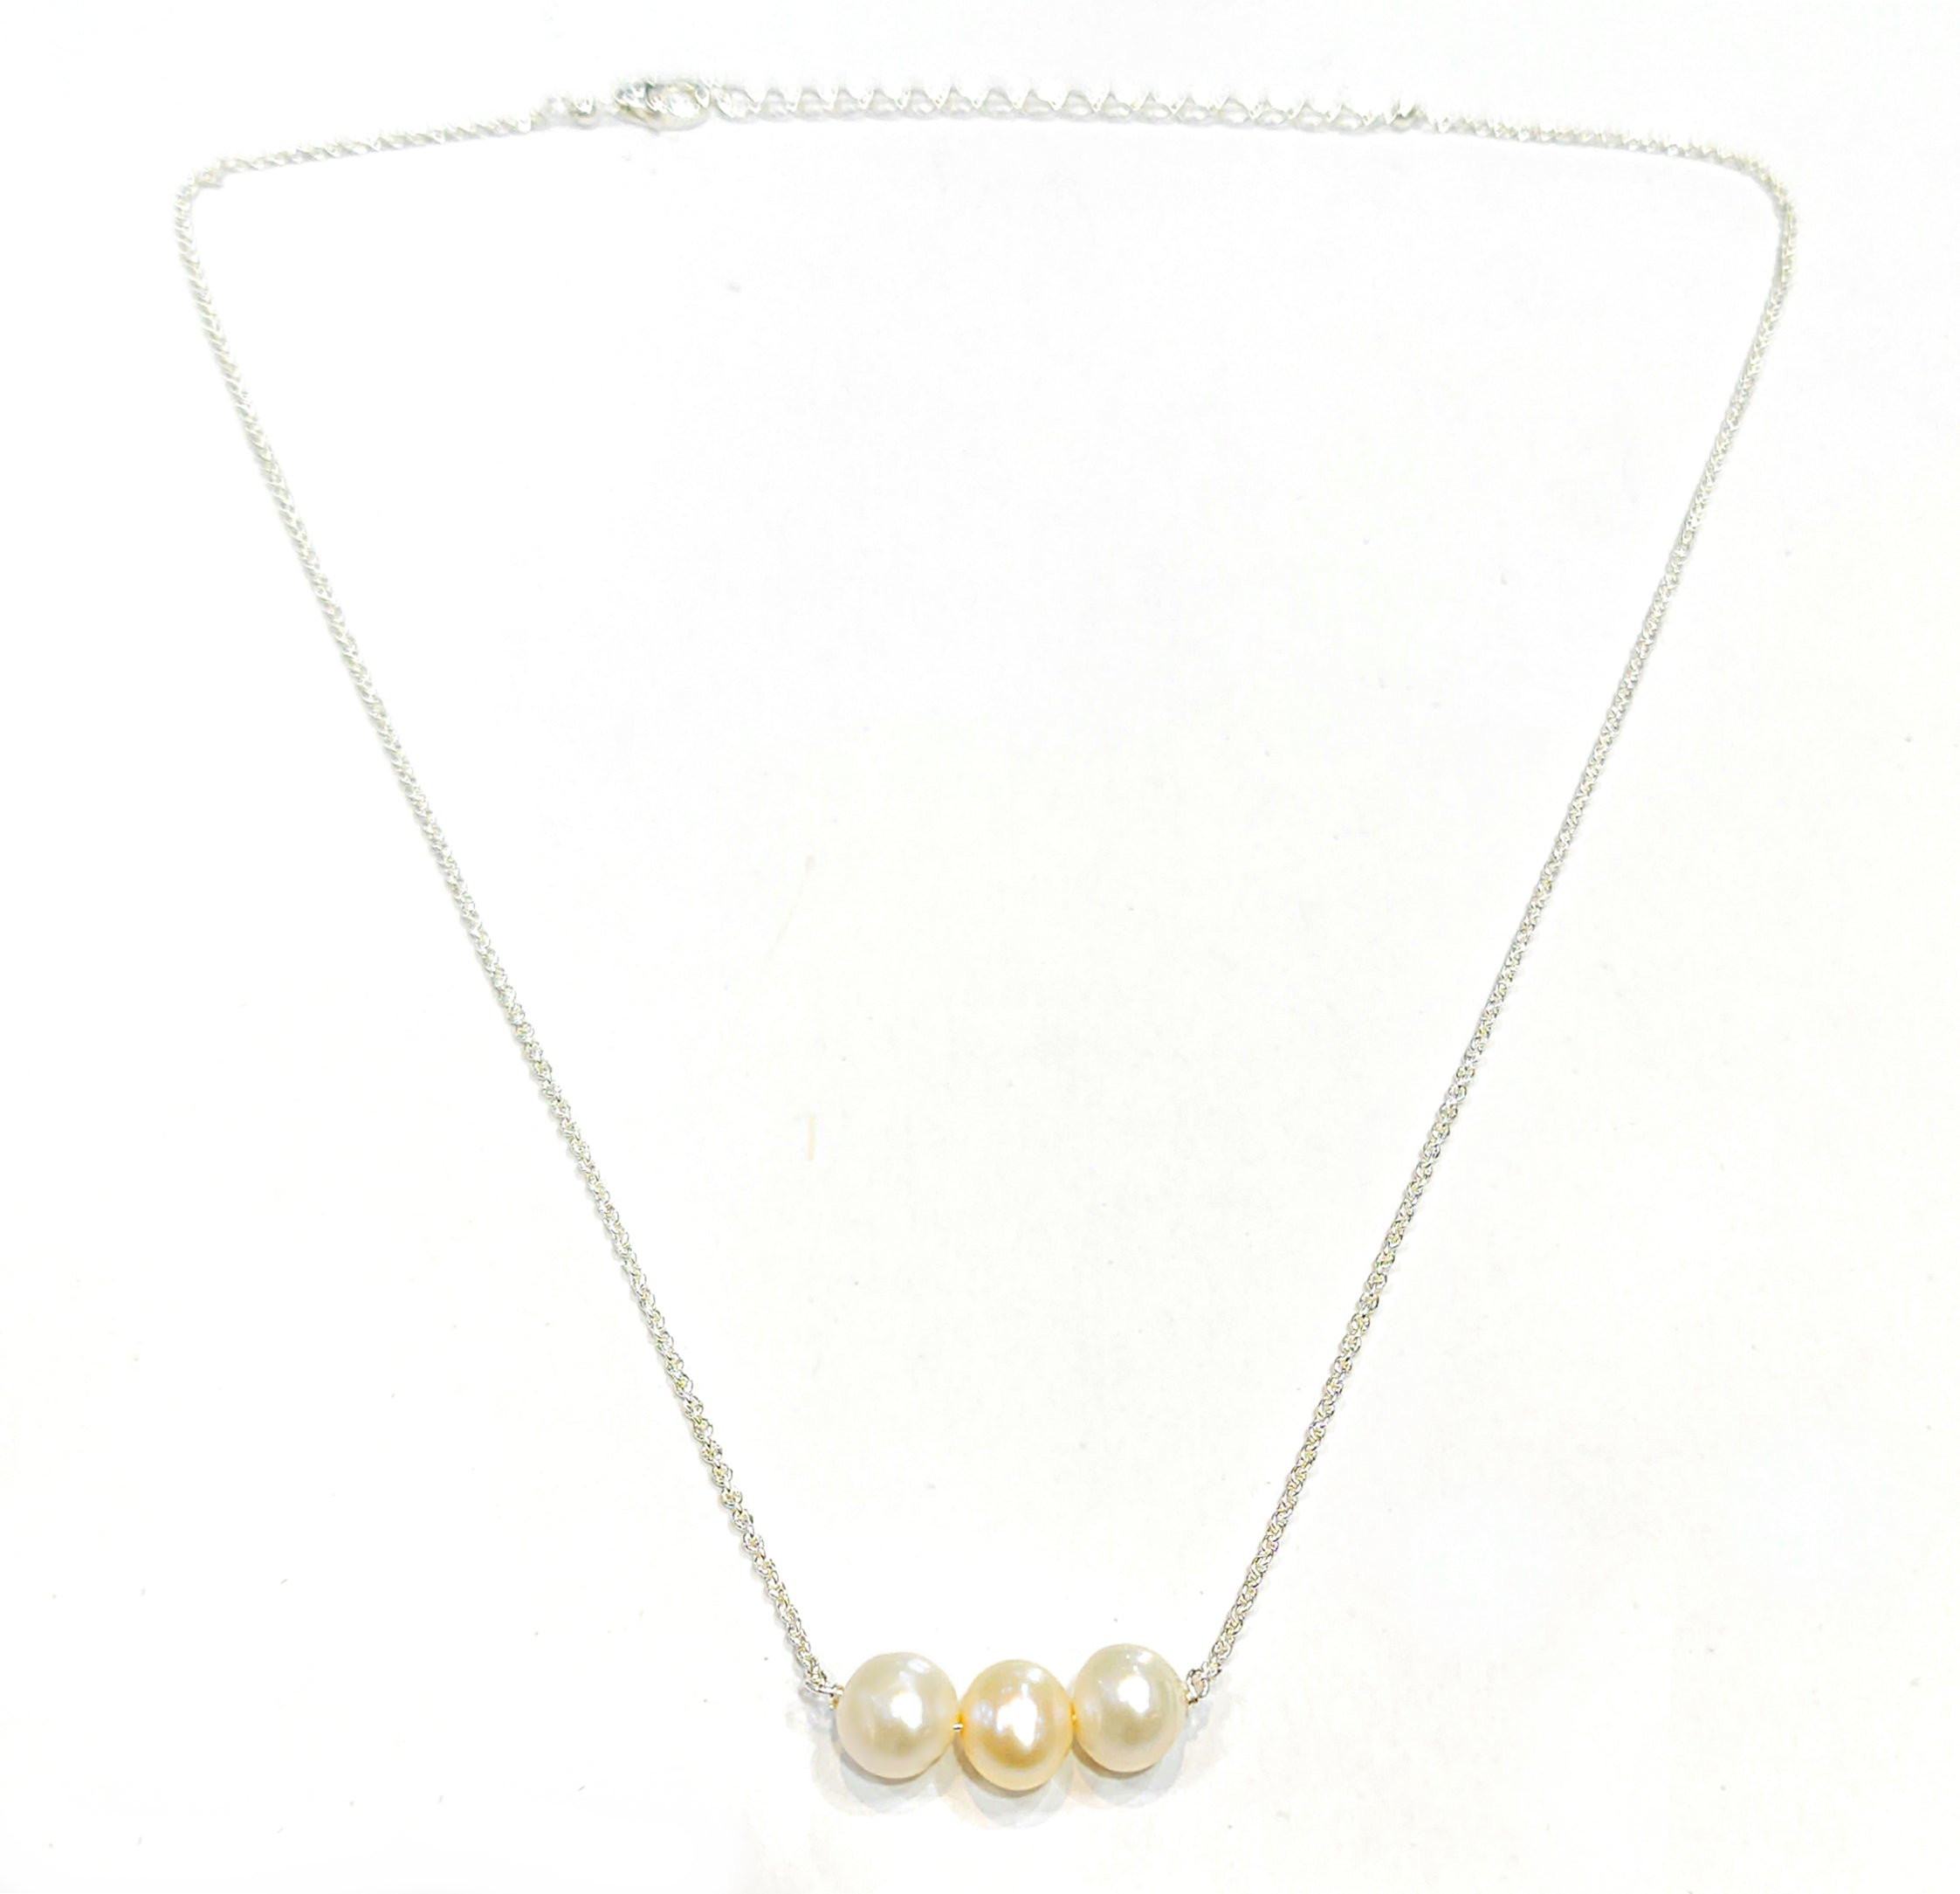 925 Sterling Silver Chain Necklace with High Luster Freshwater Pearls (925SL-FWP3)